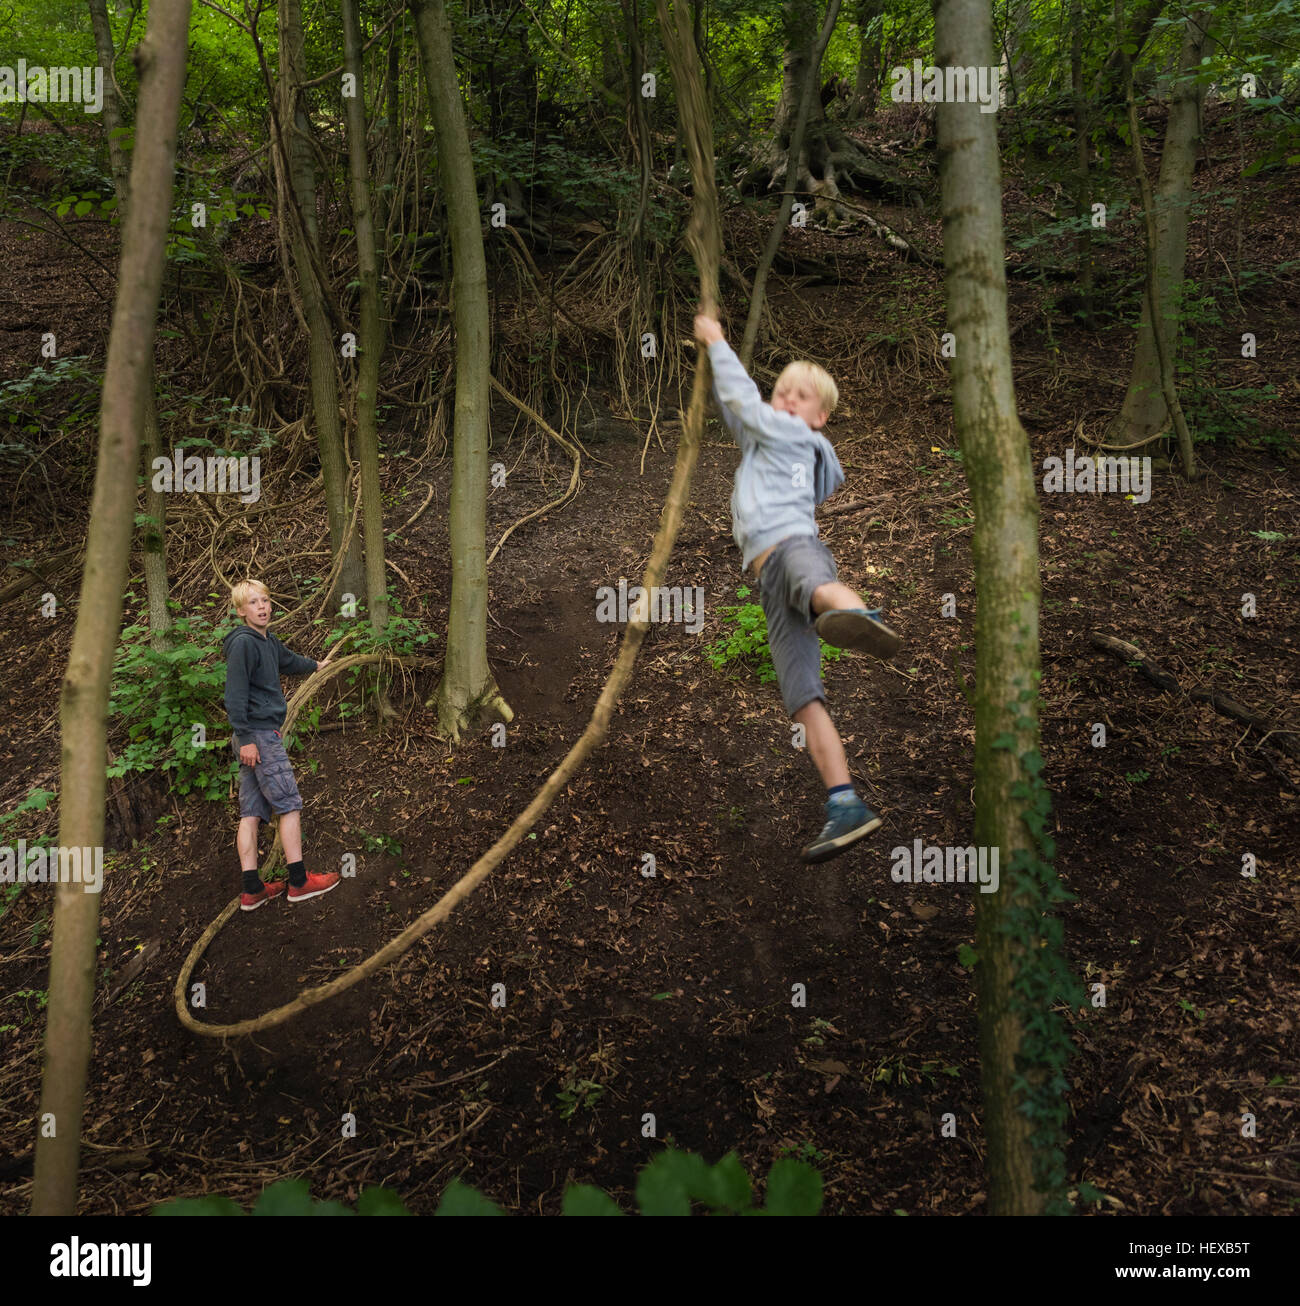 Boy in forest swinging on tree Stock Photo